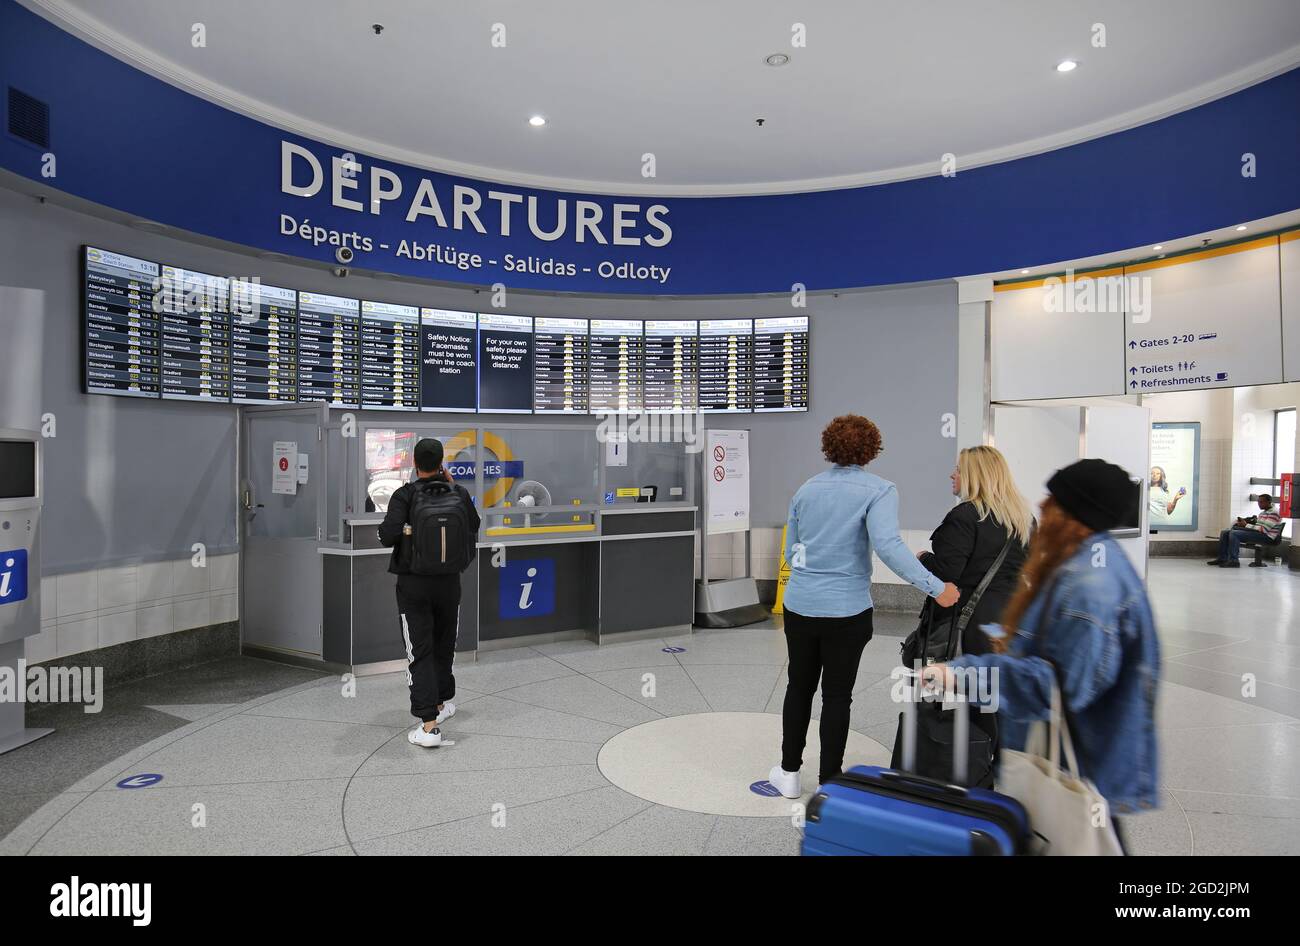 Newly refurbished entrance lobby at Victoria Coach Station, London, UK. Shows electronic departure board and information office. Stock Photo